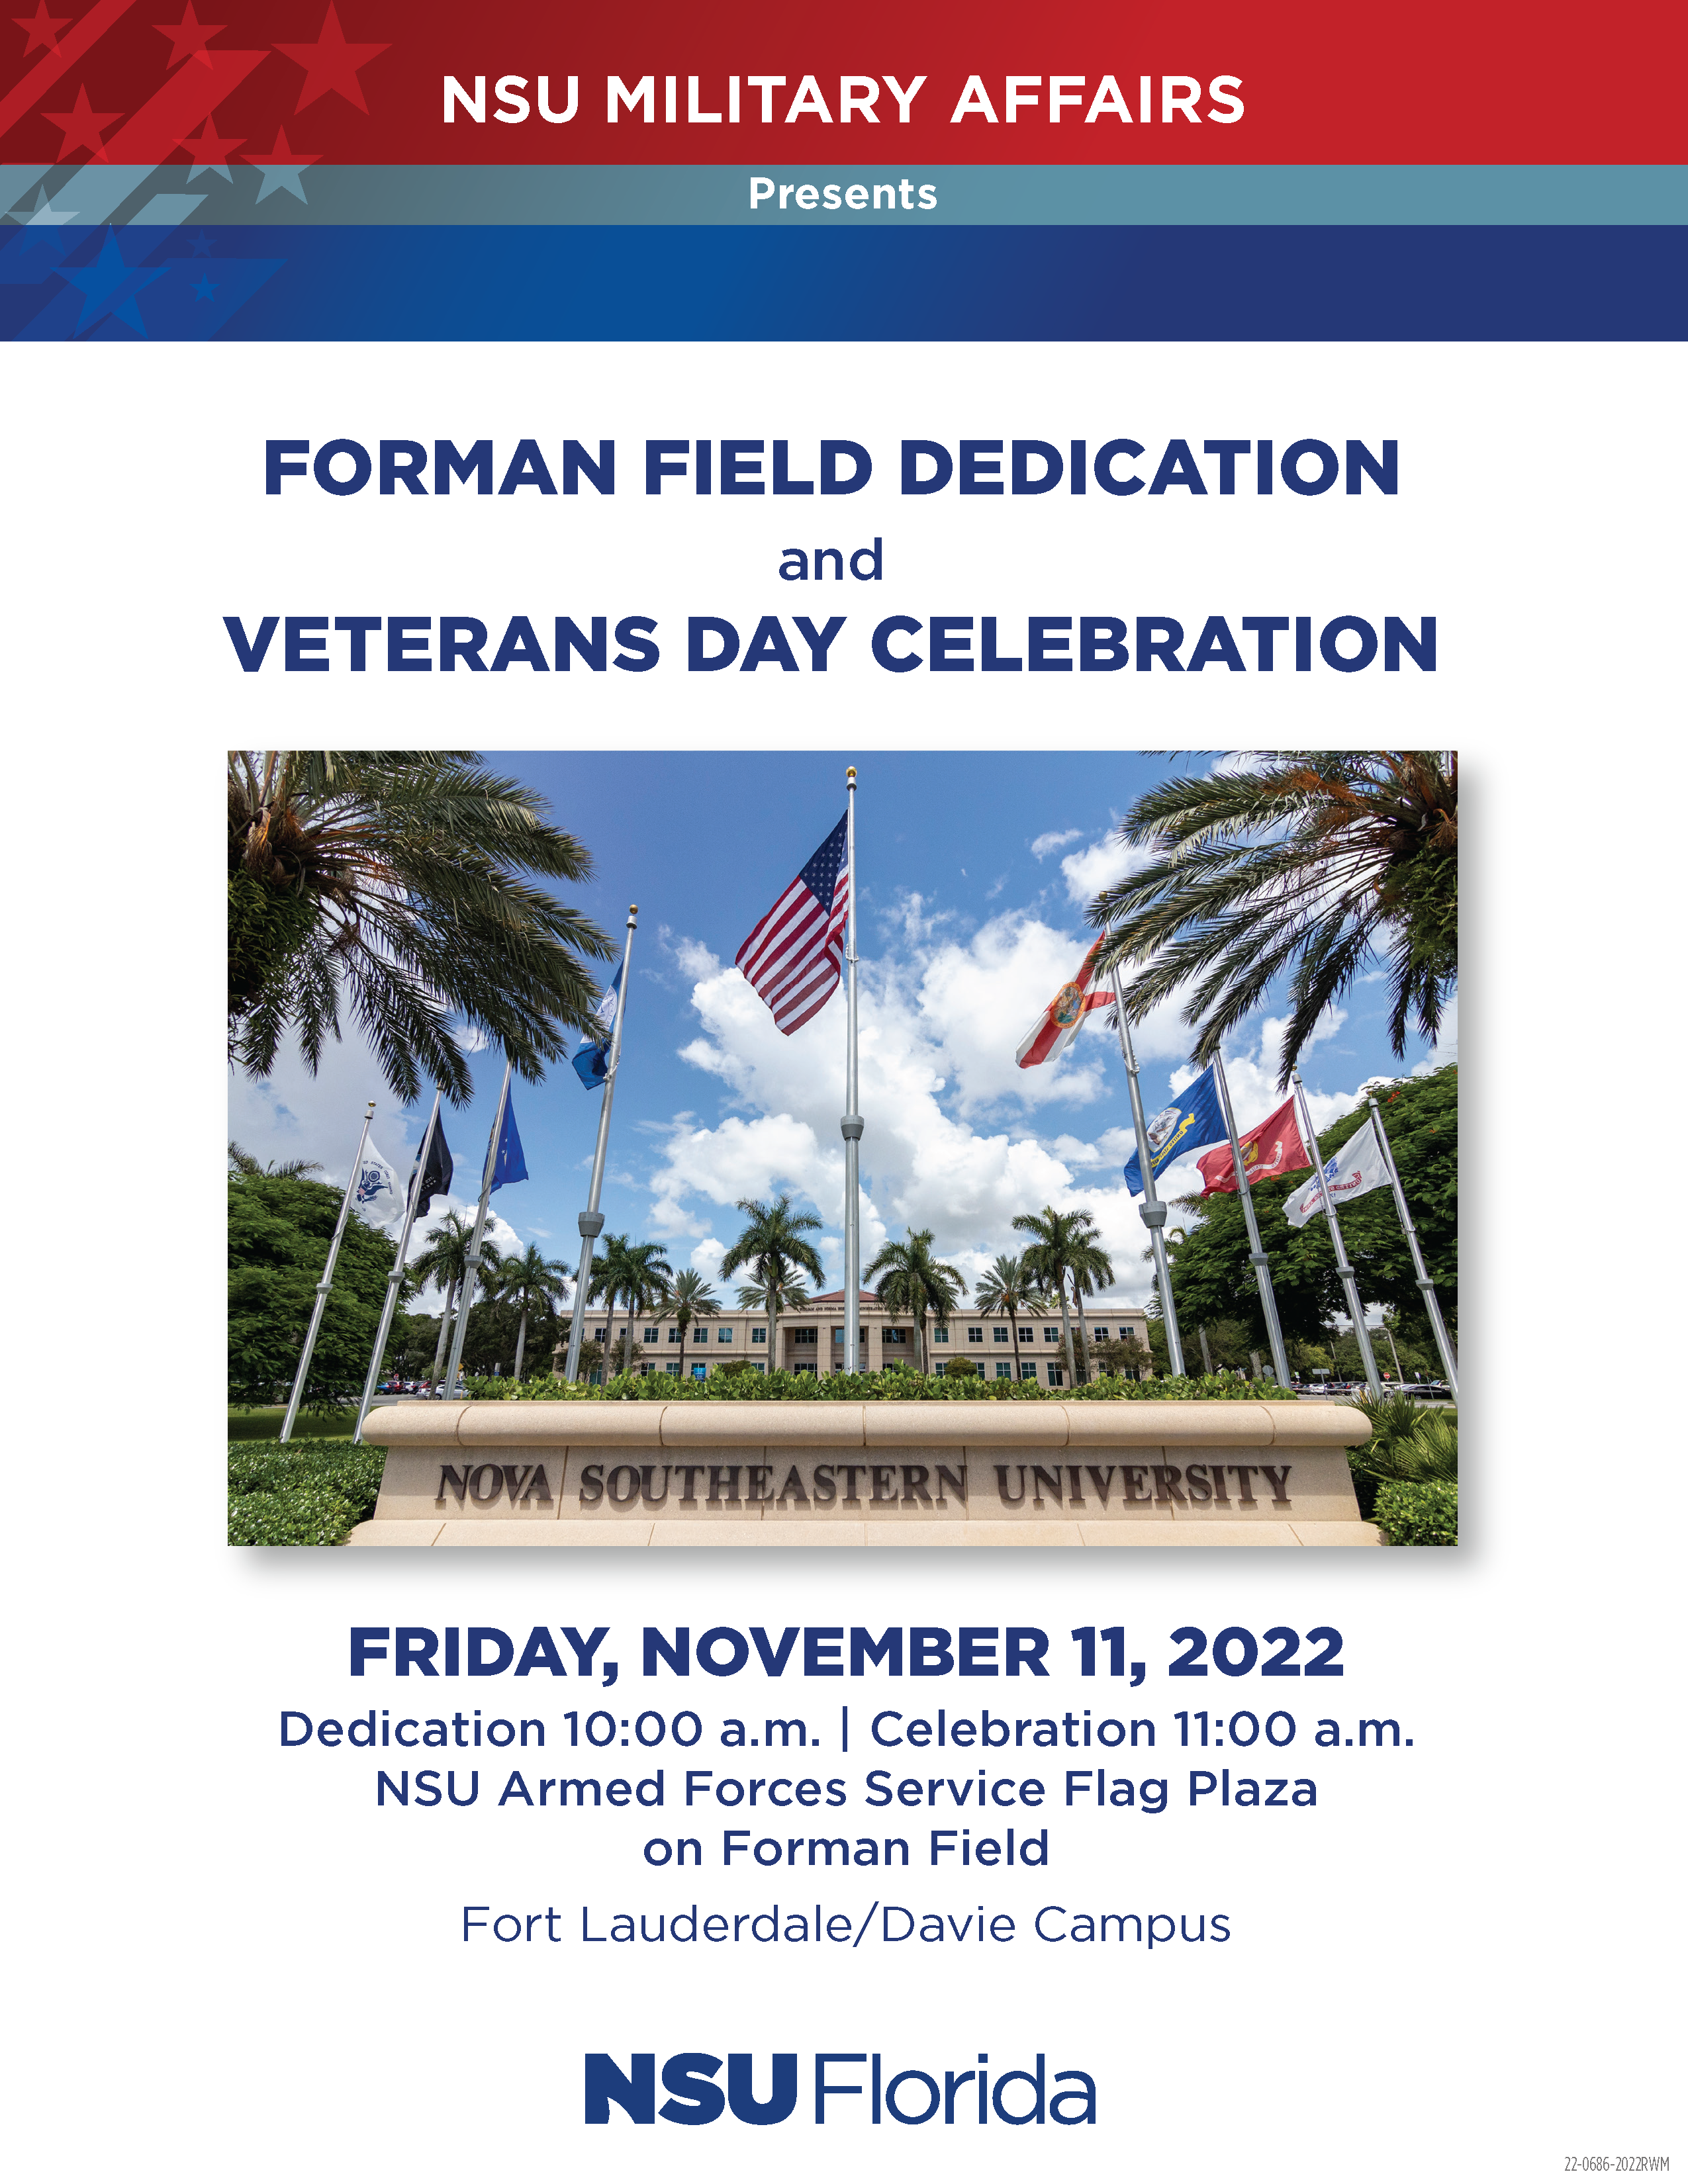 2022 Veterans Day Dedication flyer inviting others to attend the Forman Field dedication